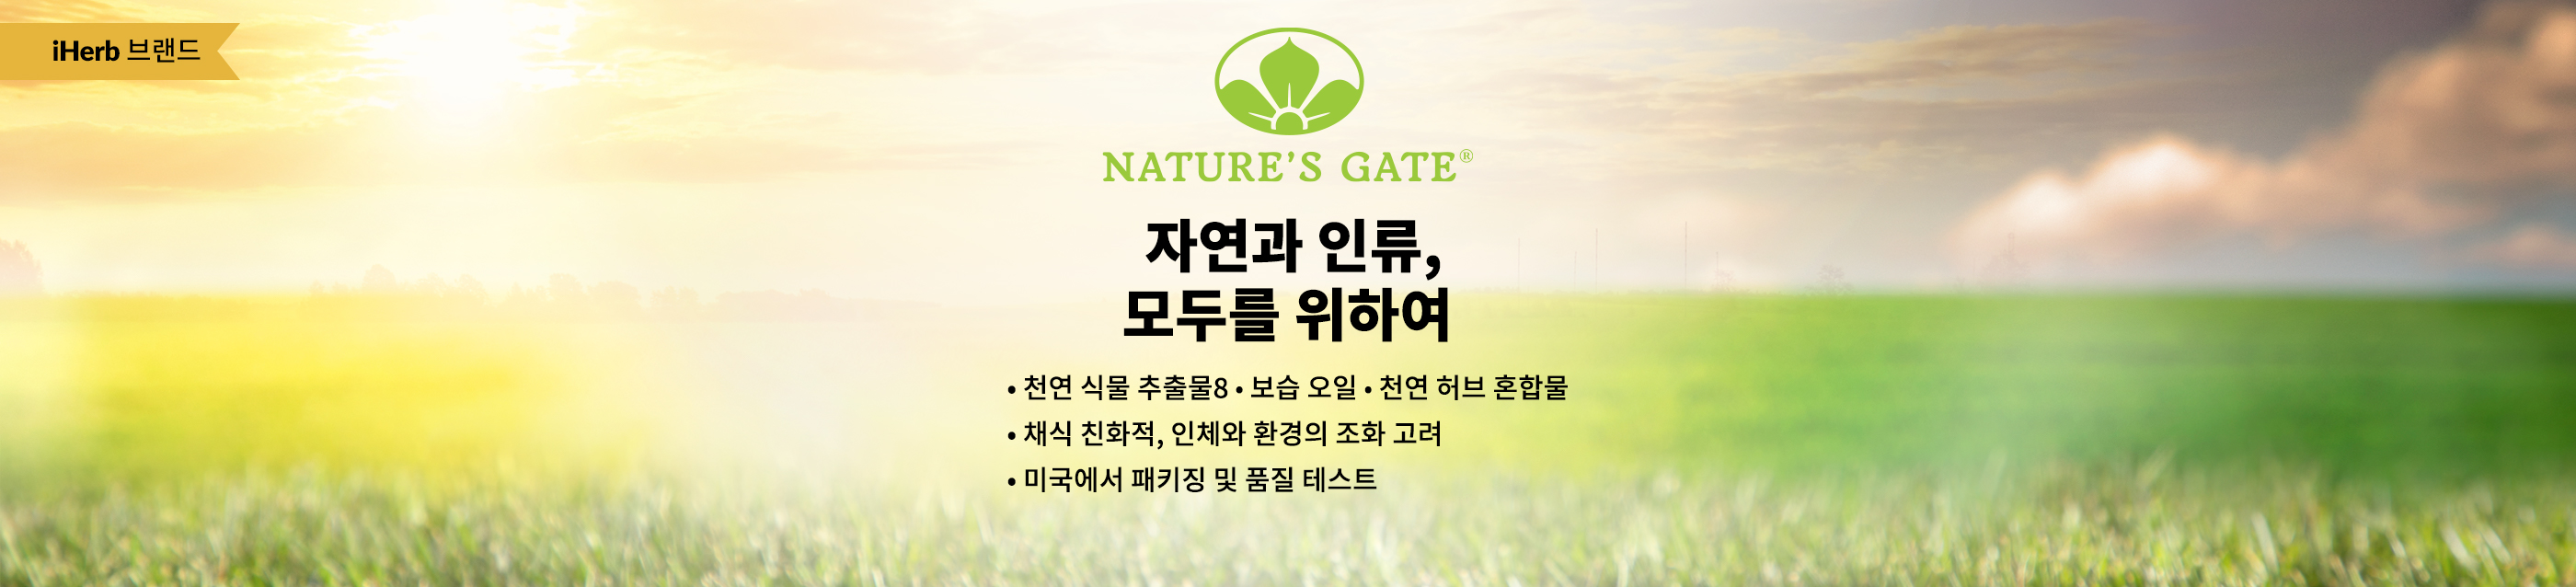 Natures Gate